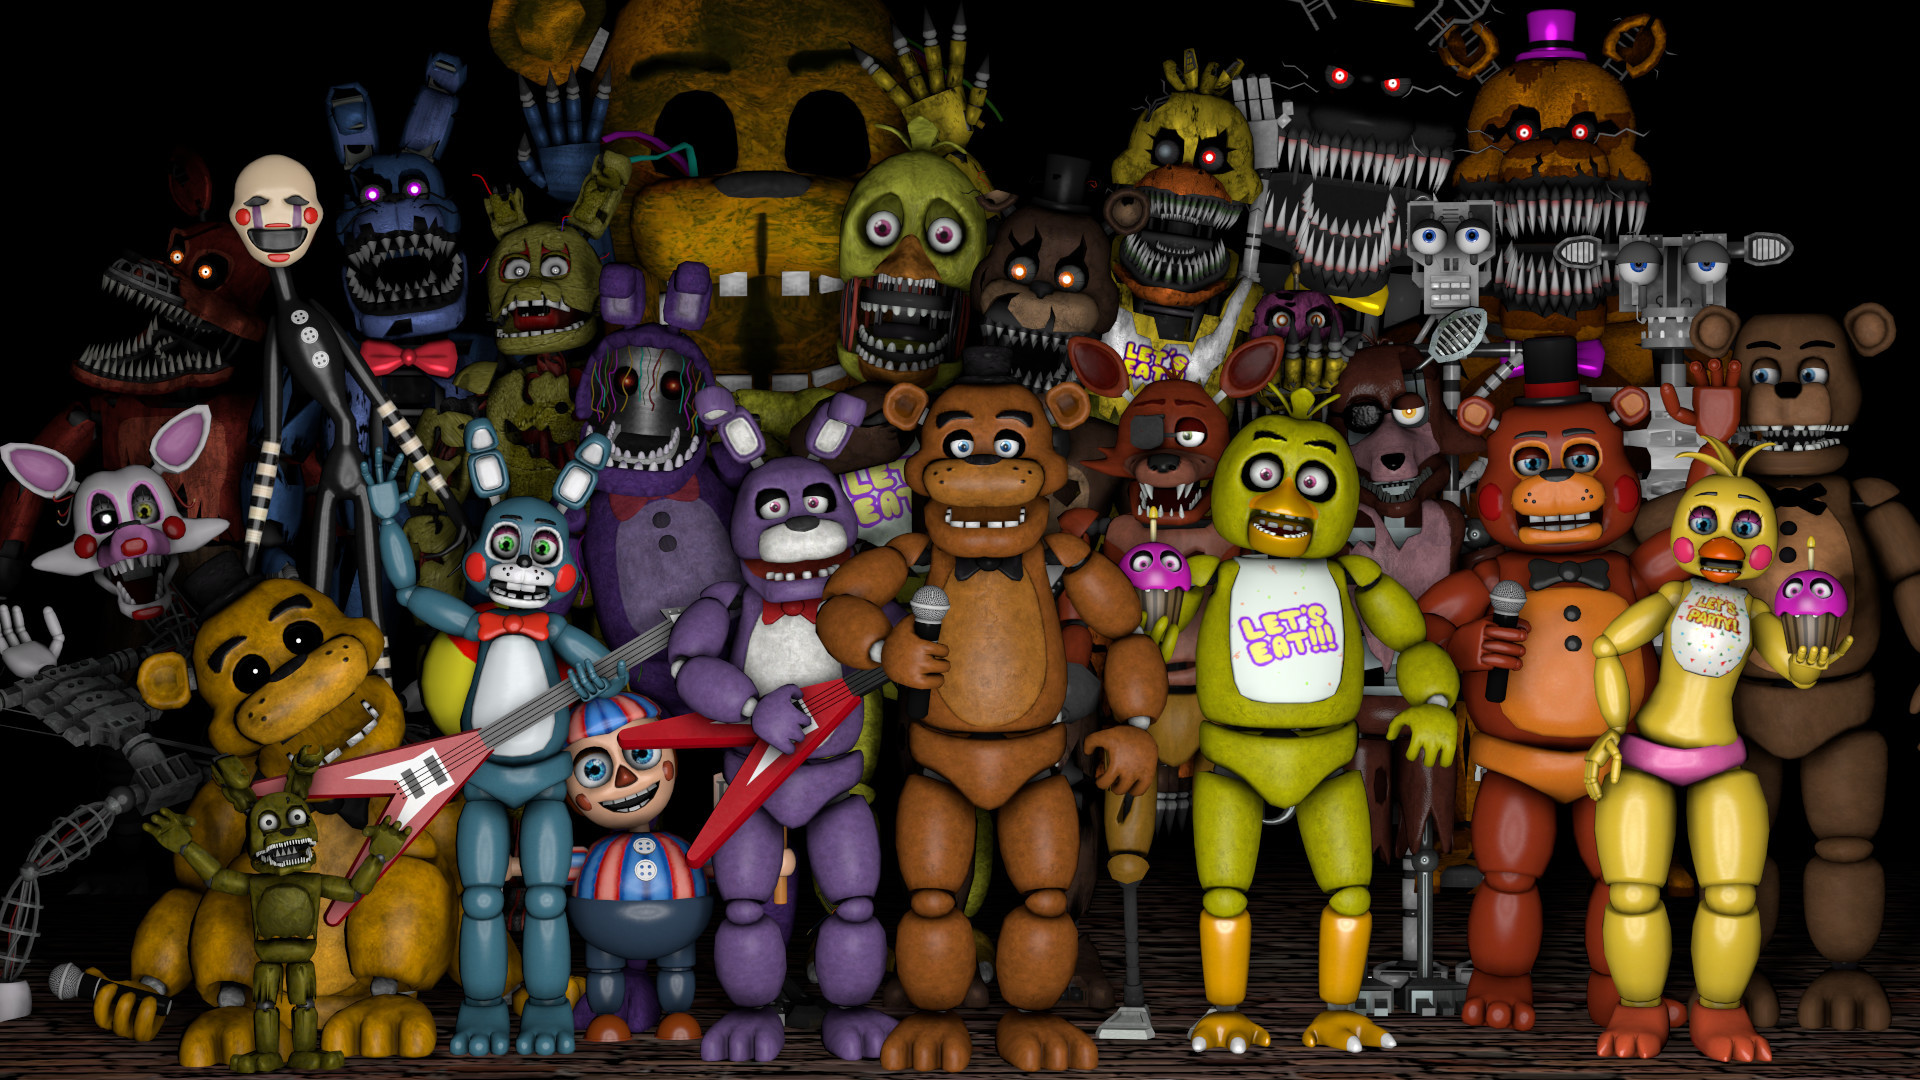 1920x1080  Five Nights at Freddy's Bonnie Wallpaper DOWNLOAD by NiksonYT